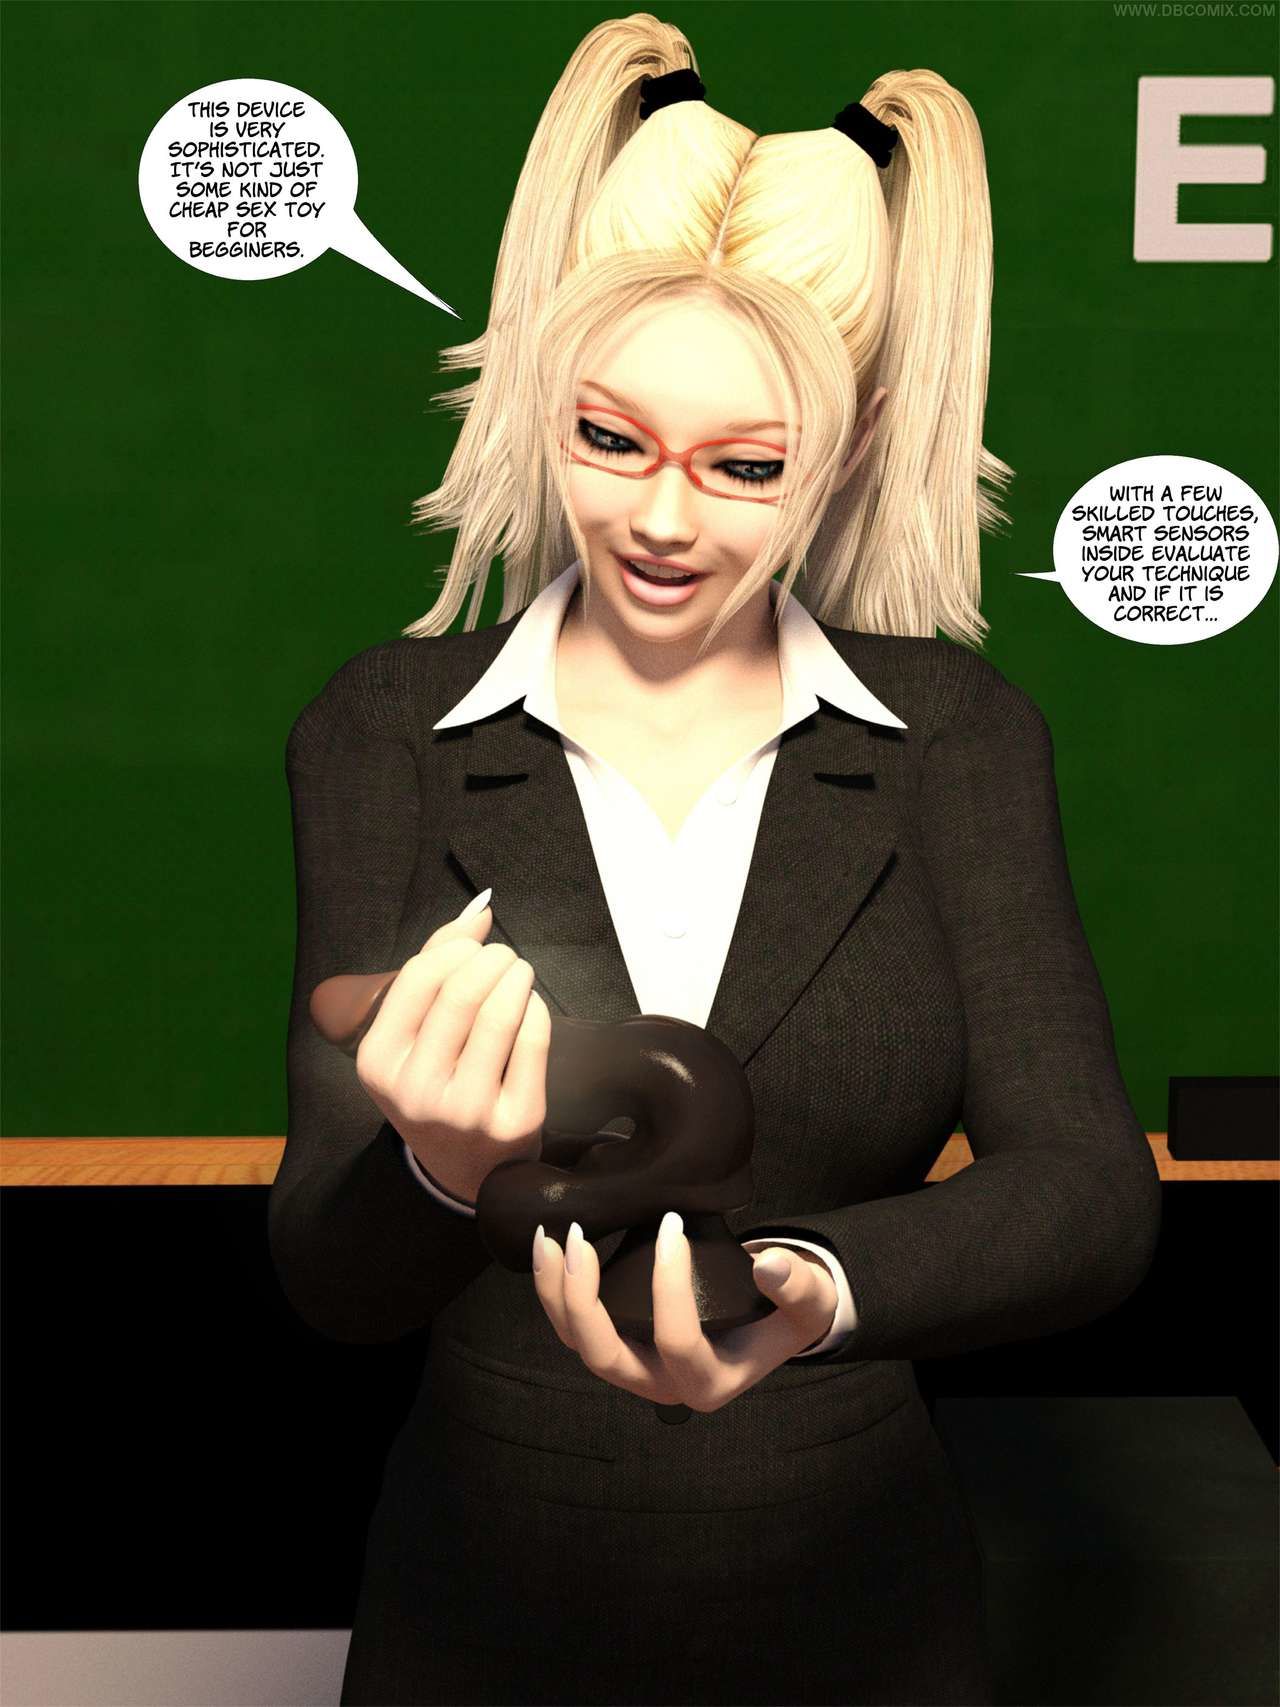 New Arkham for Superheroines 3 - Back to School DBComix page 18